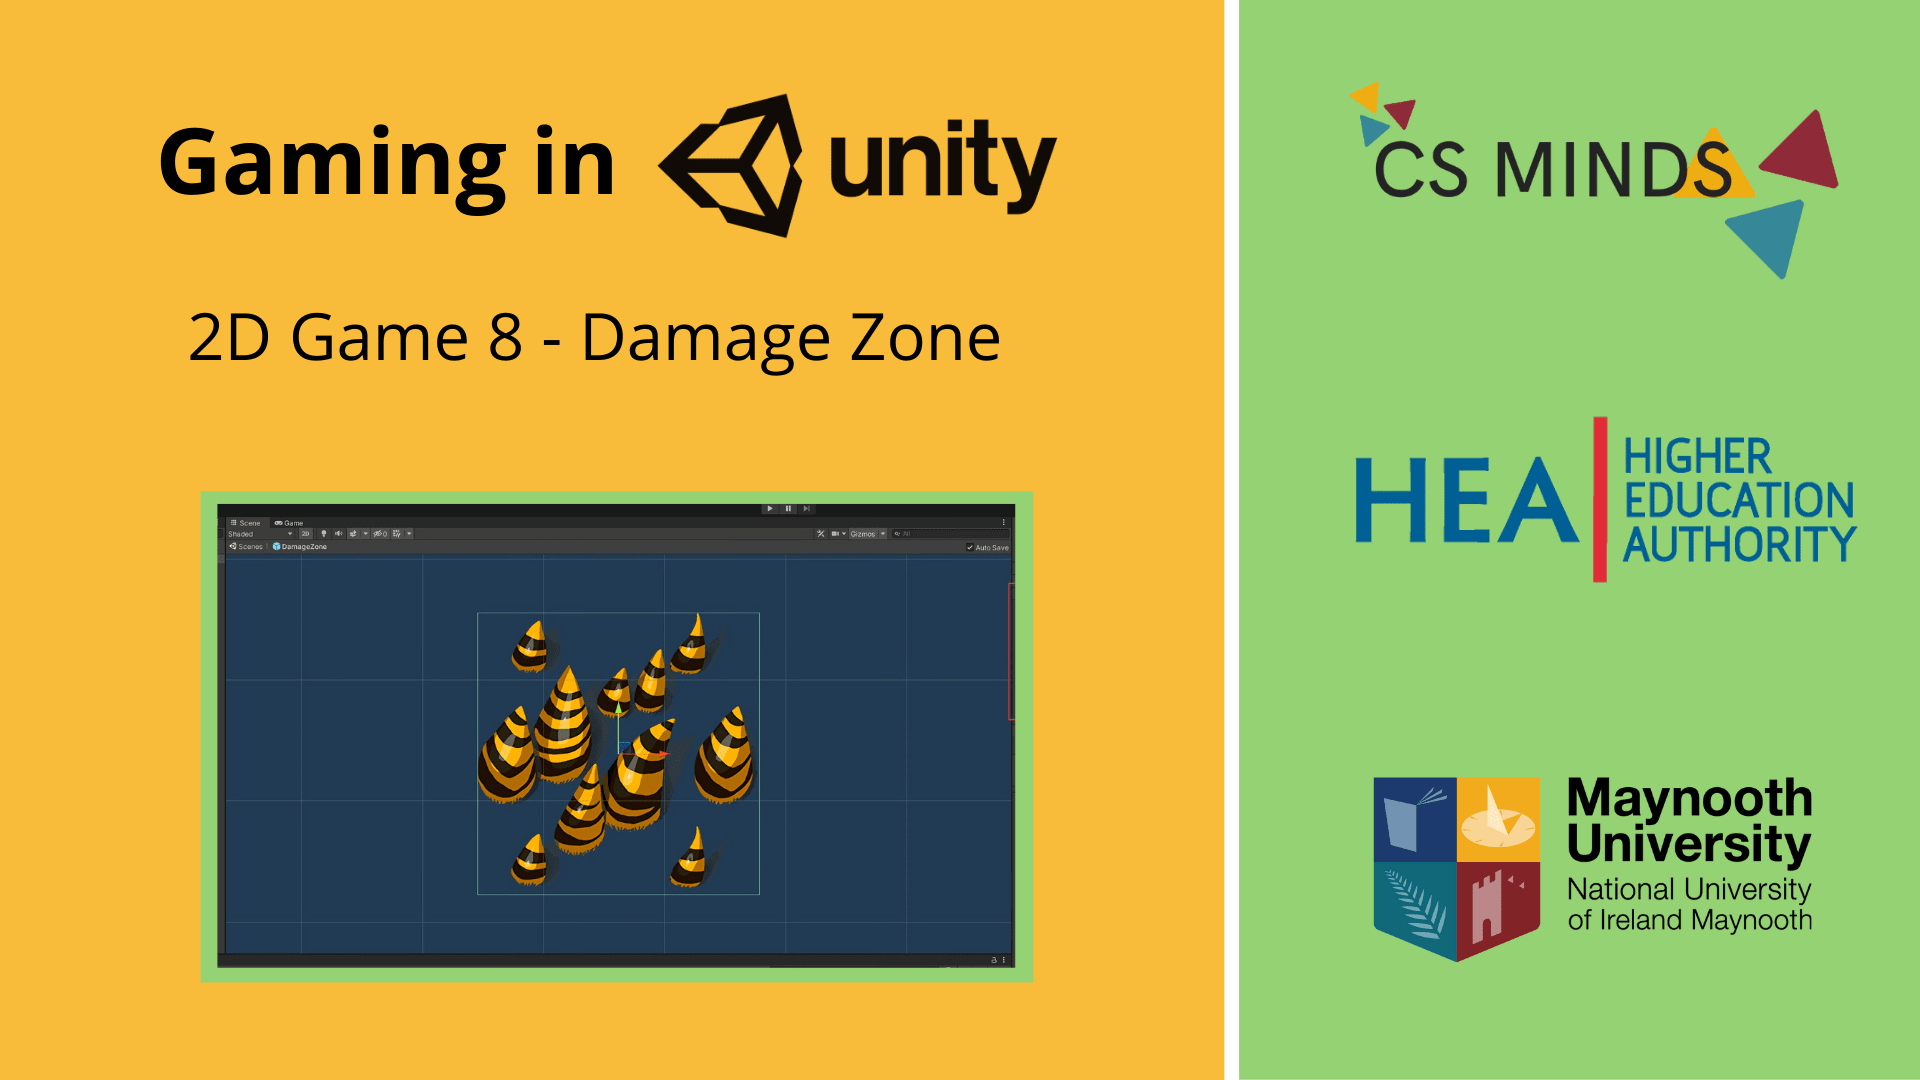 (../img/unity-12-2d-game-8-damage-zone/2d-game-8-damage-zone-header.png)